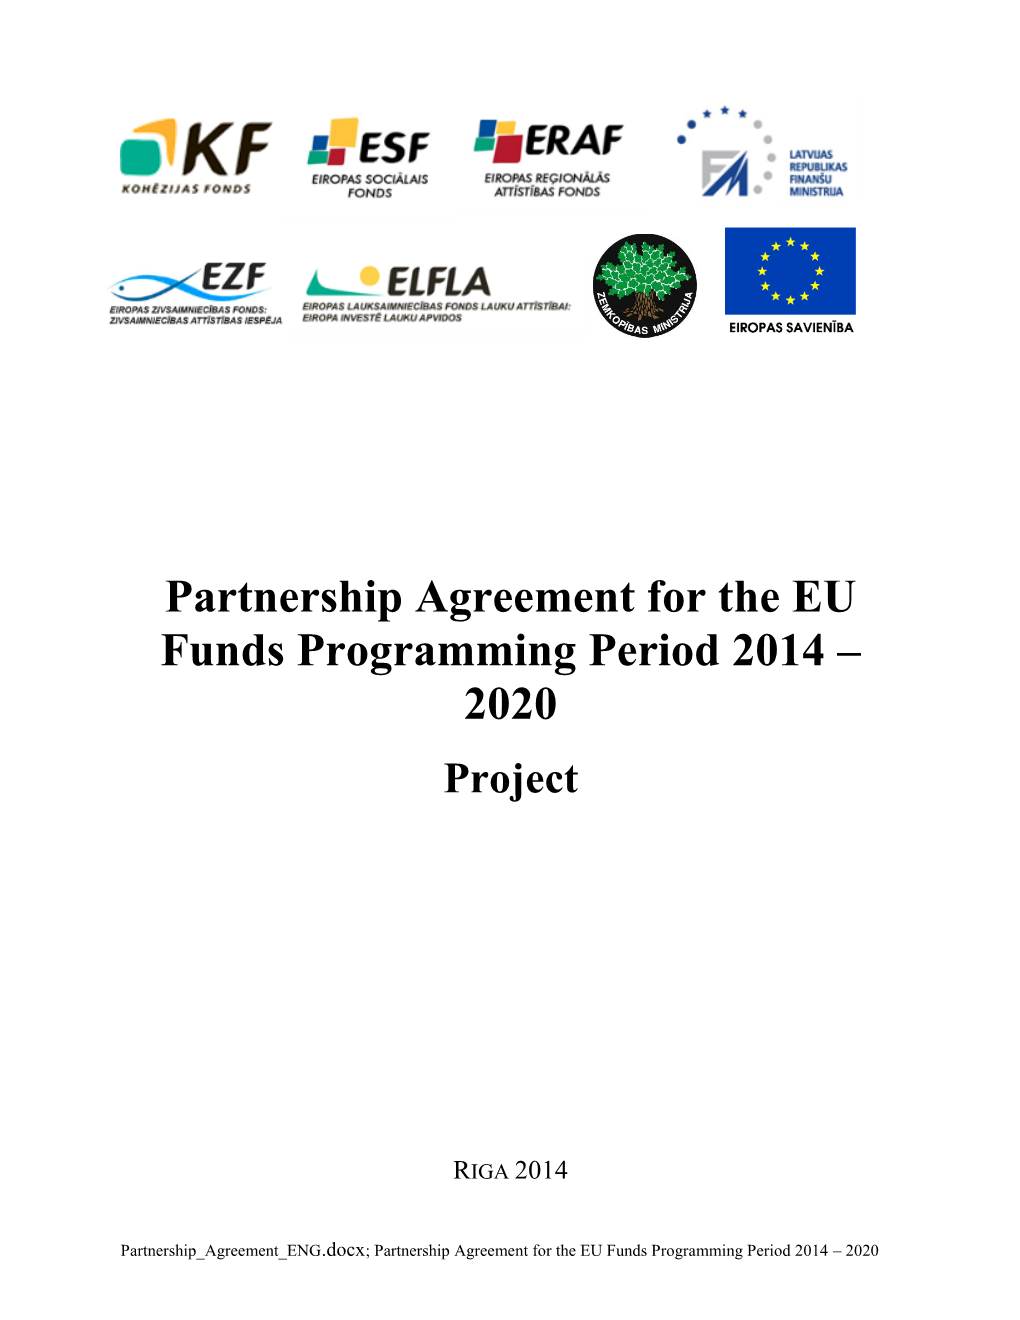 Partnership Agreement for the EU Funds Programming Period 2014 – 2020